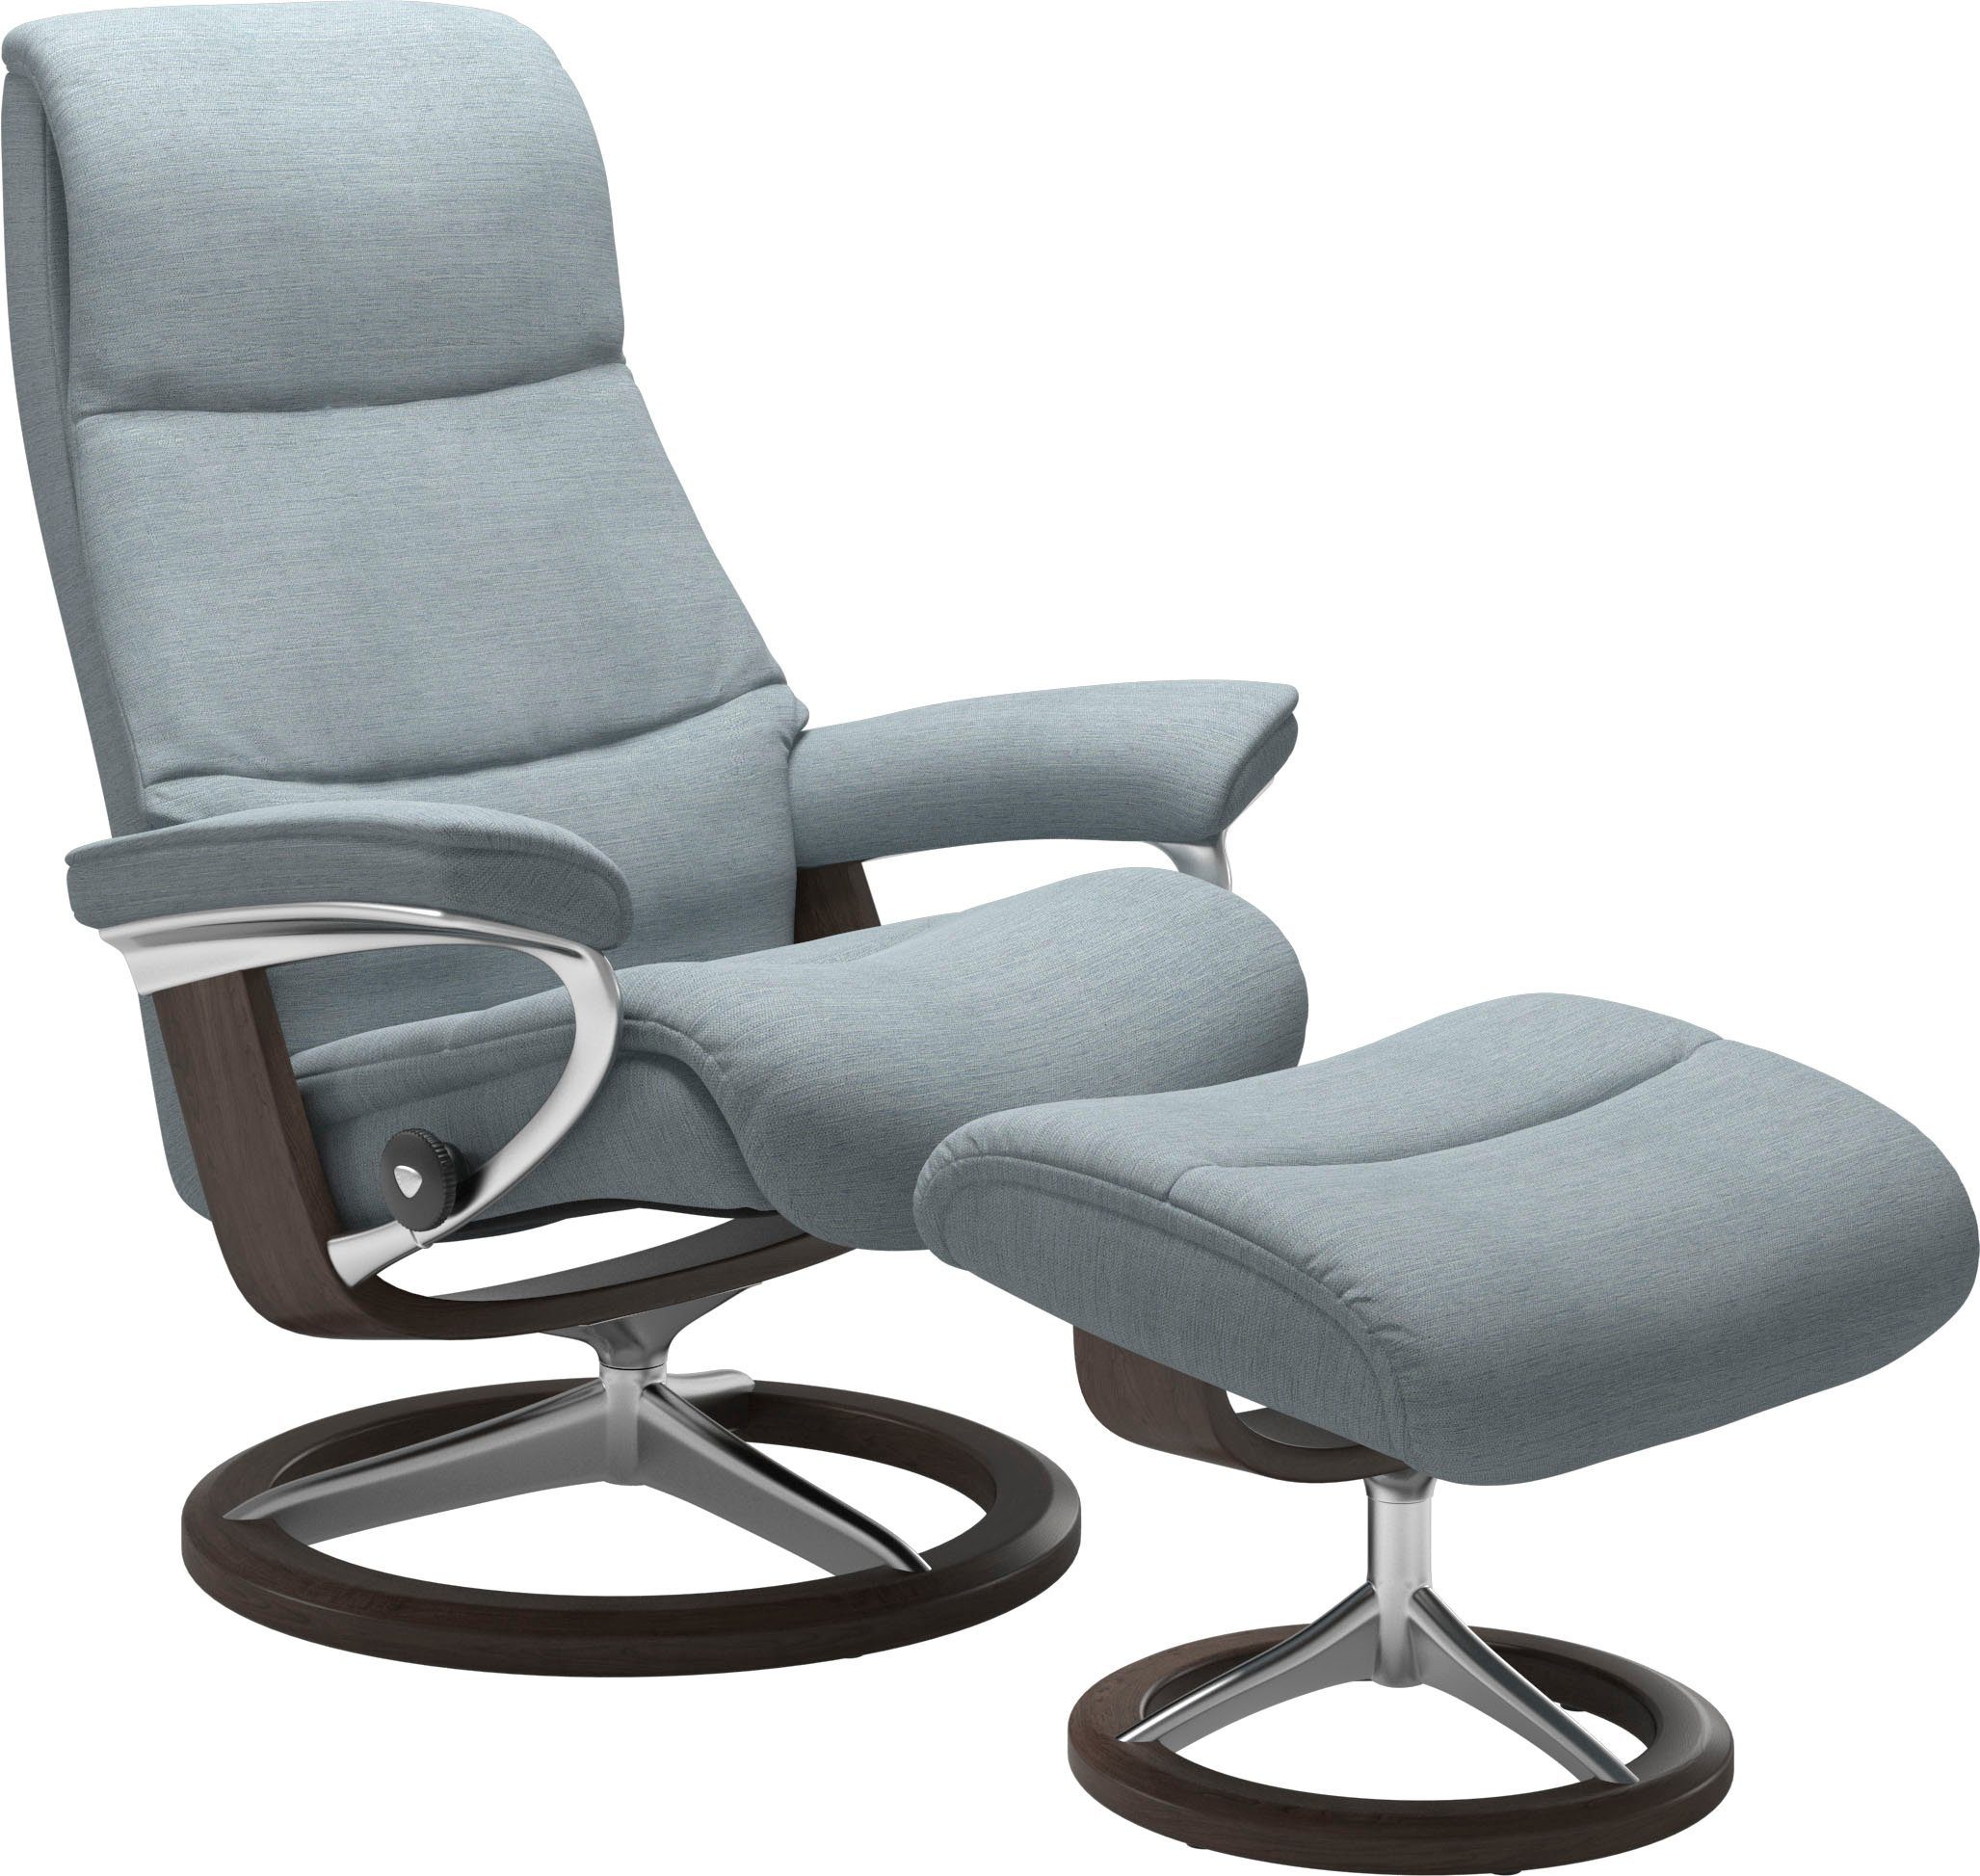 L,Gestell Größe Signature mit View, Wenge Relaxsessel Base, Stressless®